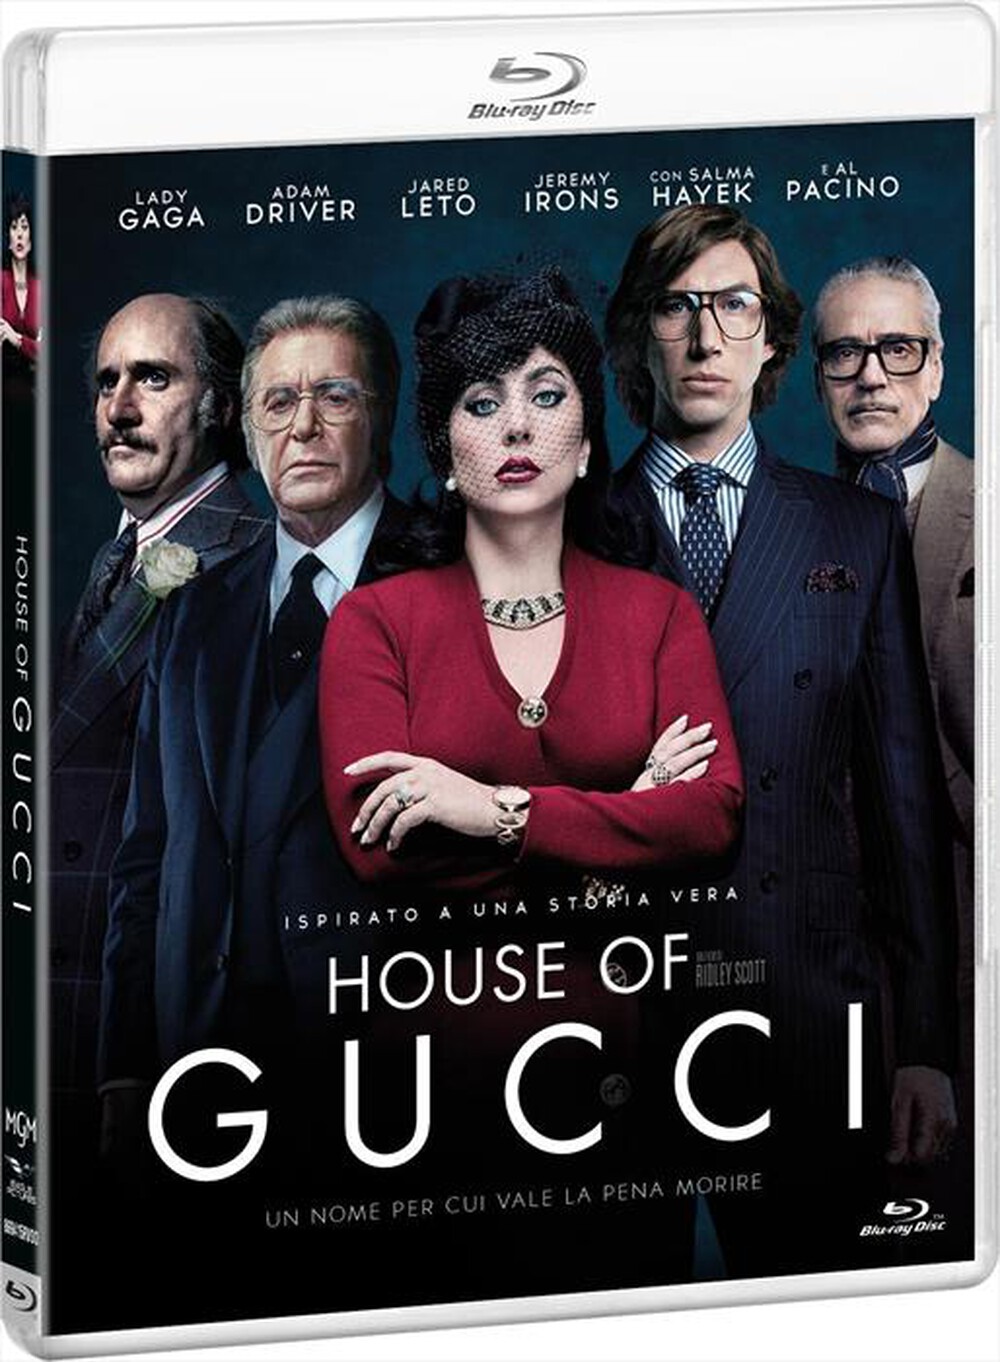 "EAGLE PICTURES - House Of Gucci (Blu-Ray+Block Notes)"